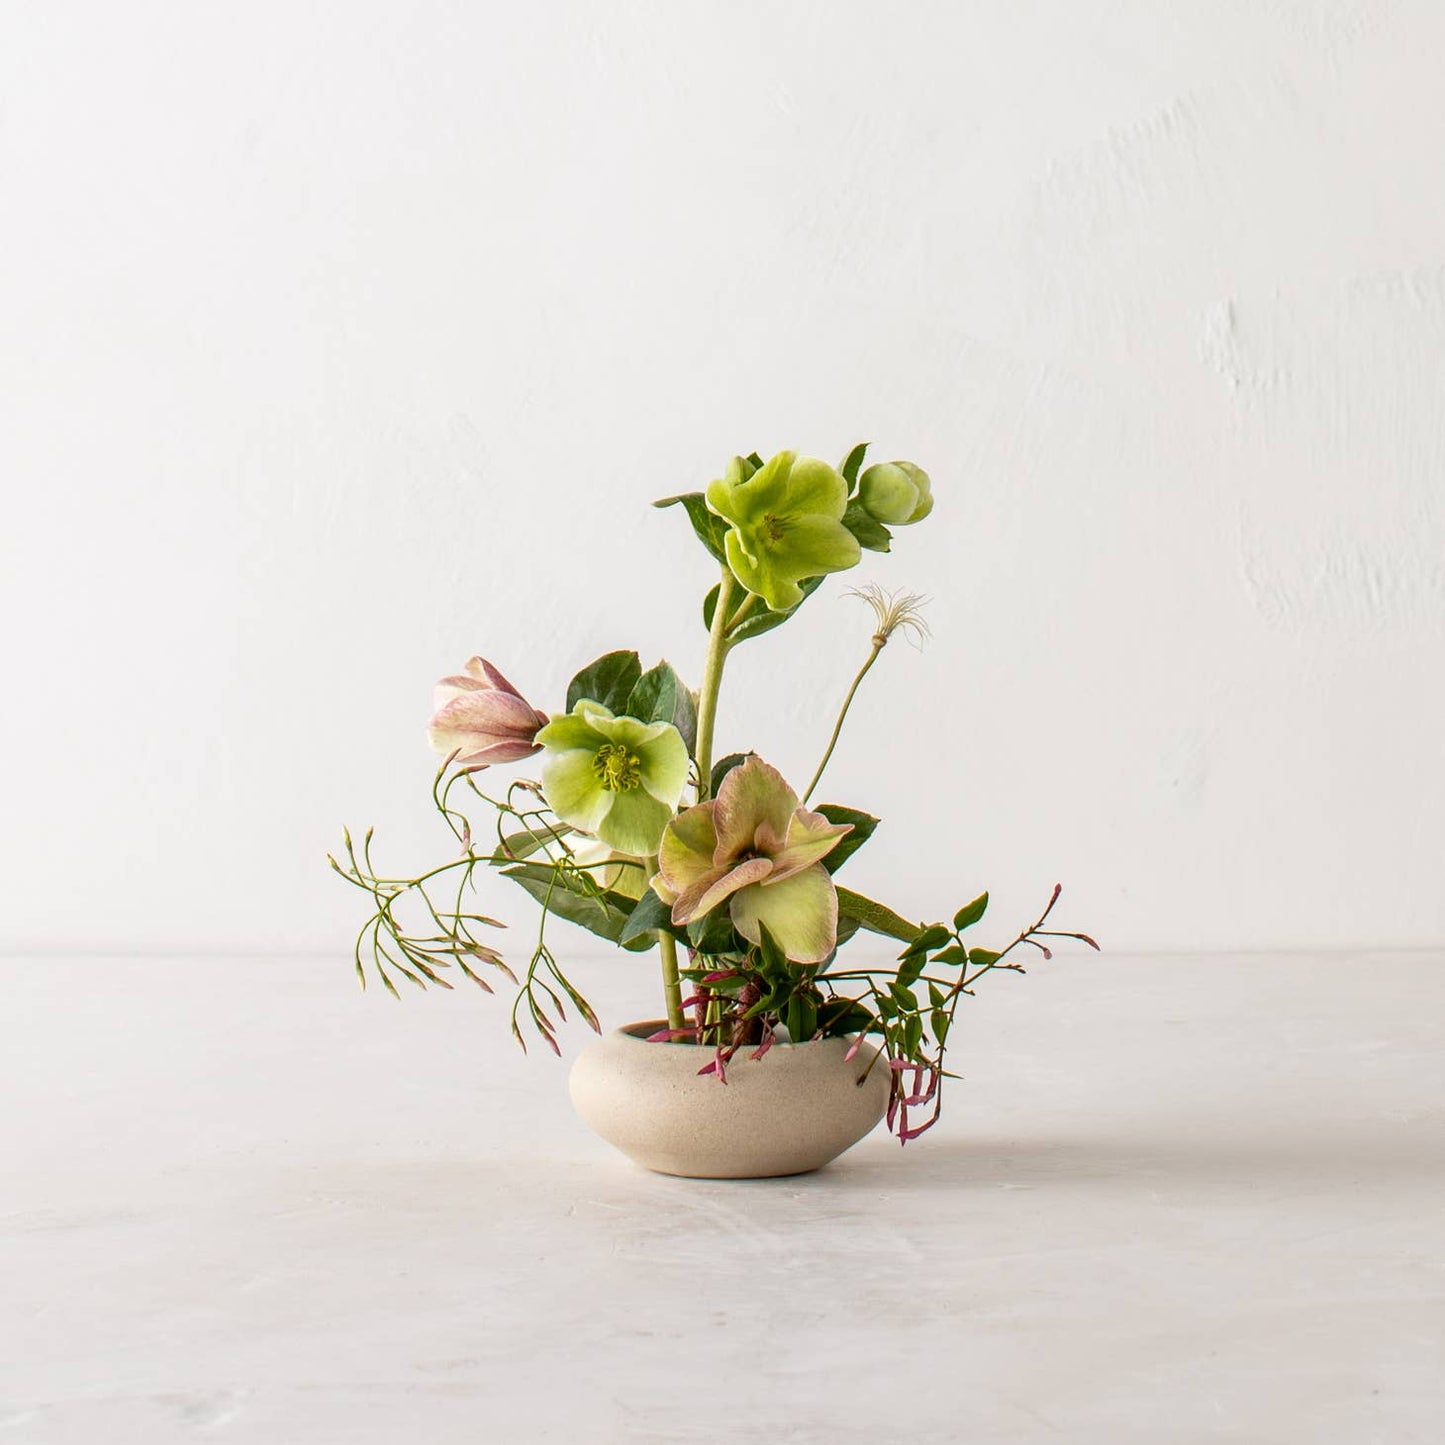 convivial ikebana vase no 1 / Slow down and enjoy the subtle beauty of nature with a handmade ceramic ikebana vase. This round, shallow vase is designed for minimal, ikebana inspired arrangements. Handmade with proprietary sandstone with an ivory glaze on the interior.